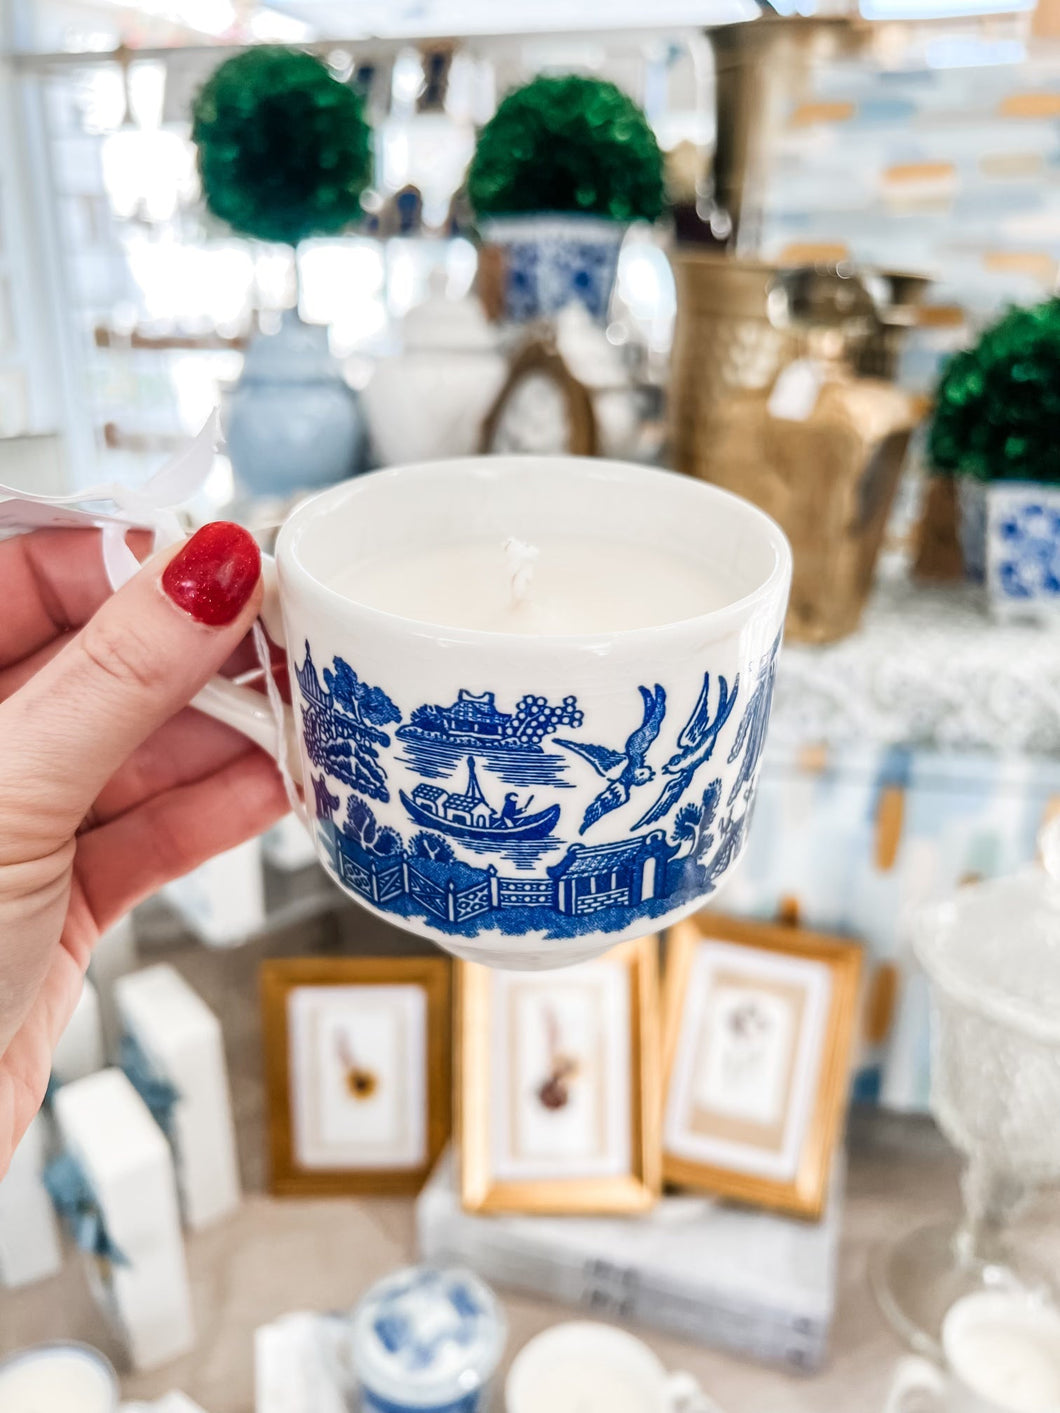 Butterfly Garden Blue and White Tea Cup B scented candle-Belle Reve Designs by Megan Gatte